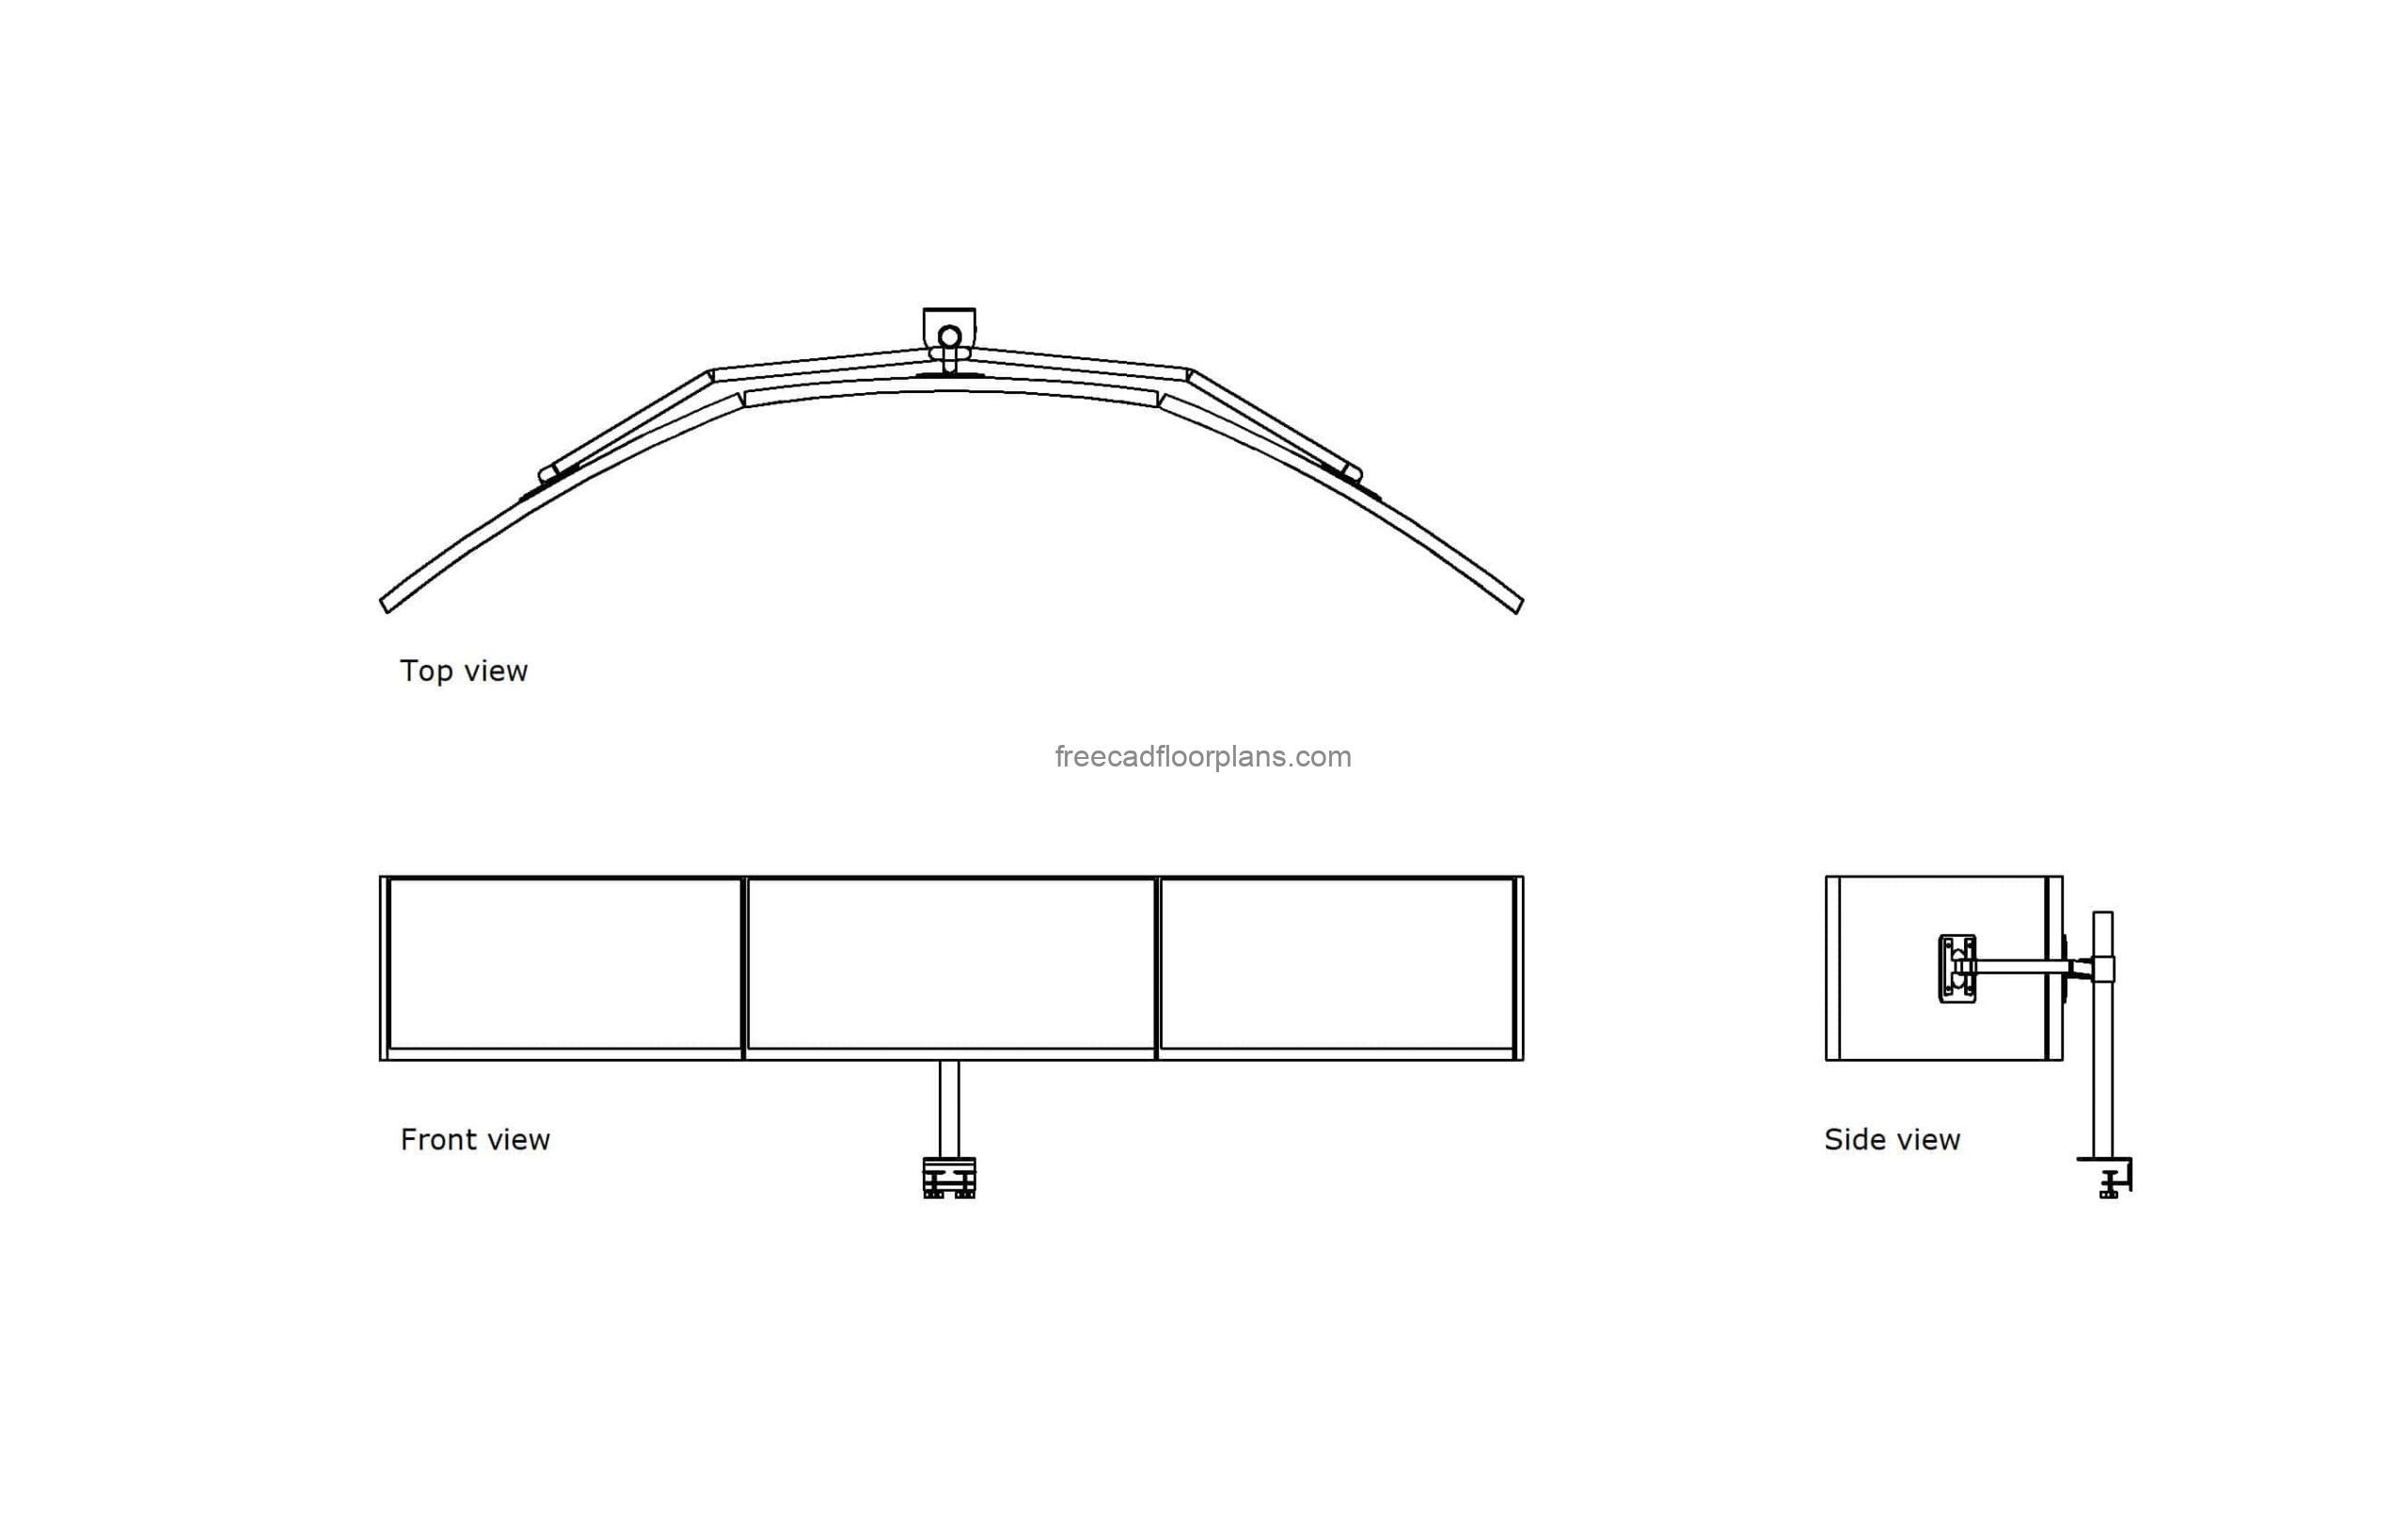 autocad 2d drawing of a triple monitor setup, plan and elevation views, dwg file free for download